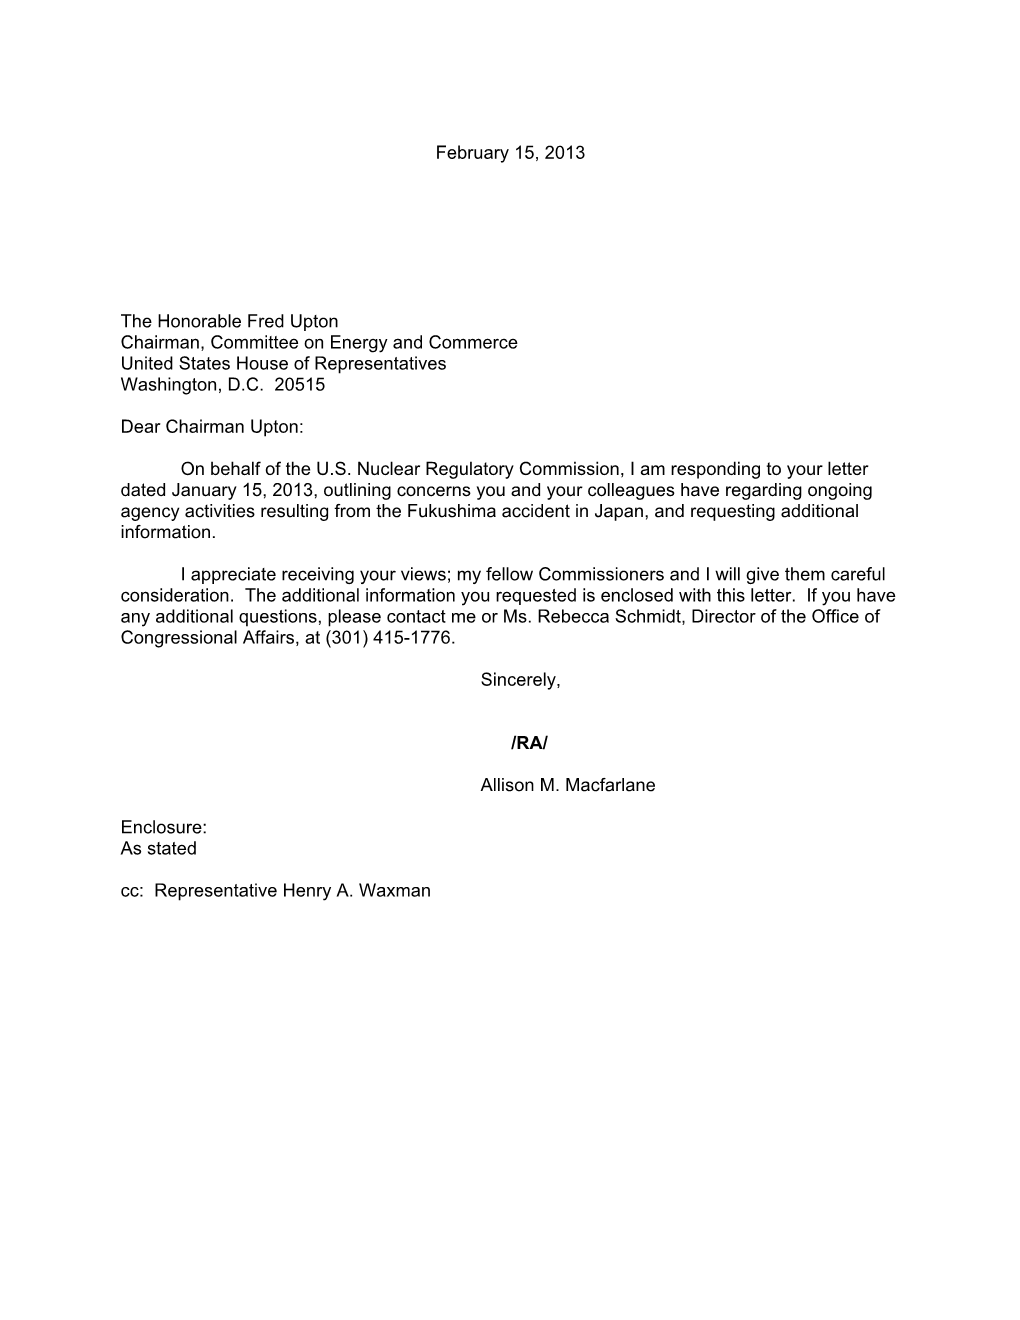 Response Ltr. to Rep. Fred Upton, Et Al. from Chairman Macfarlane